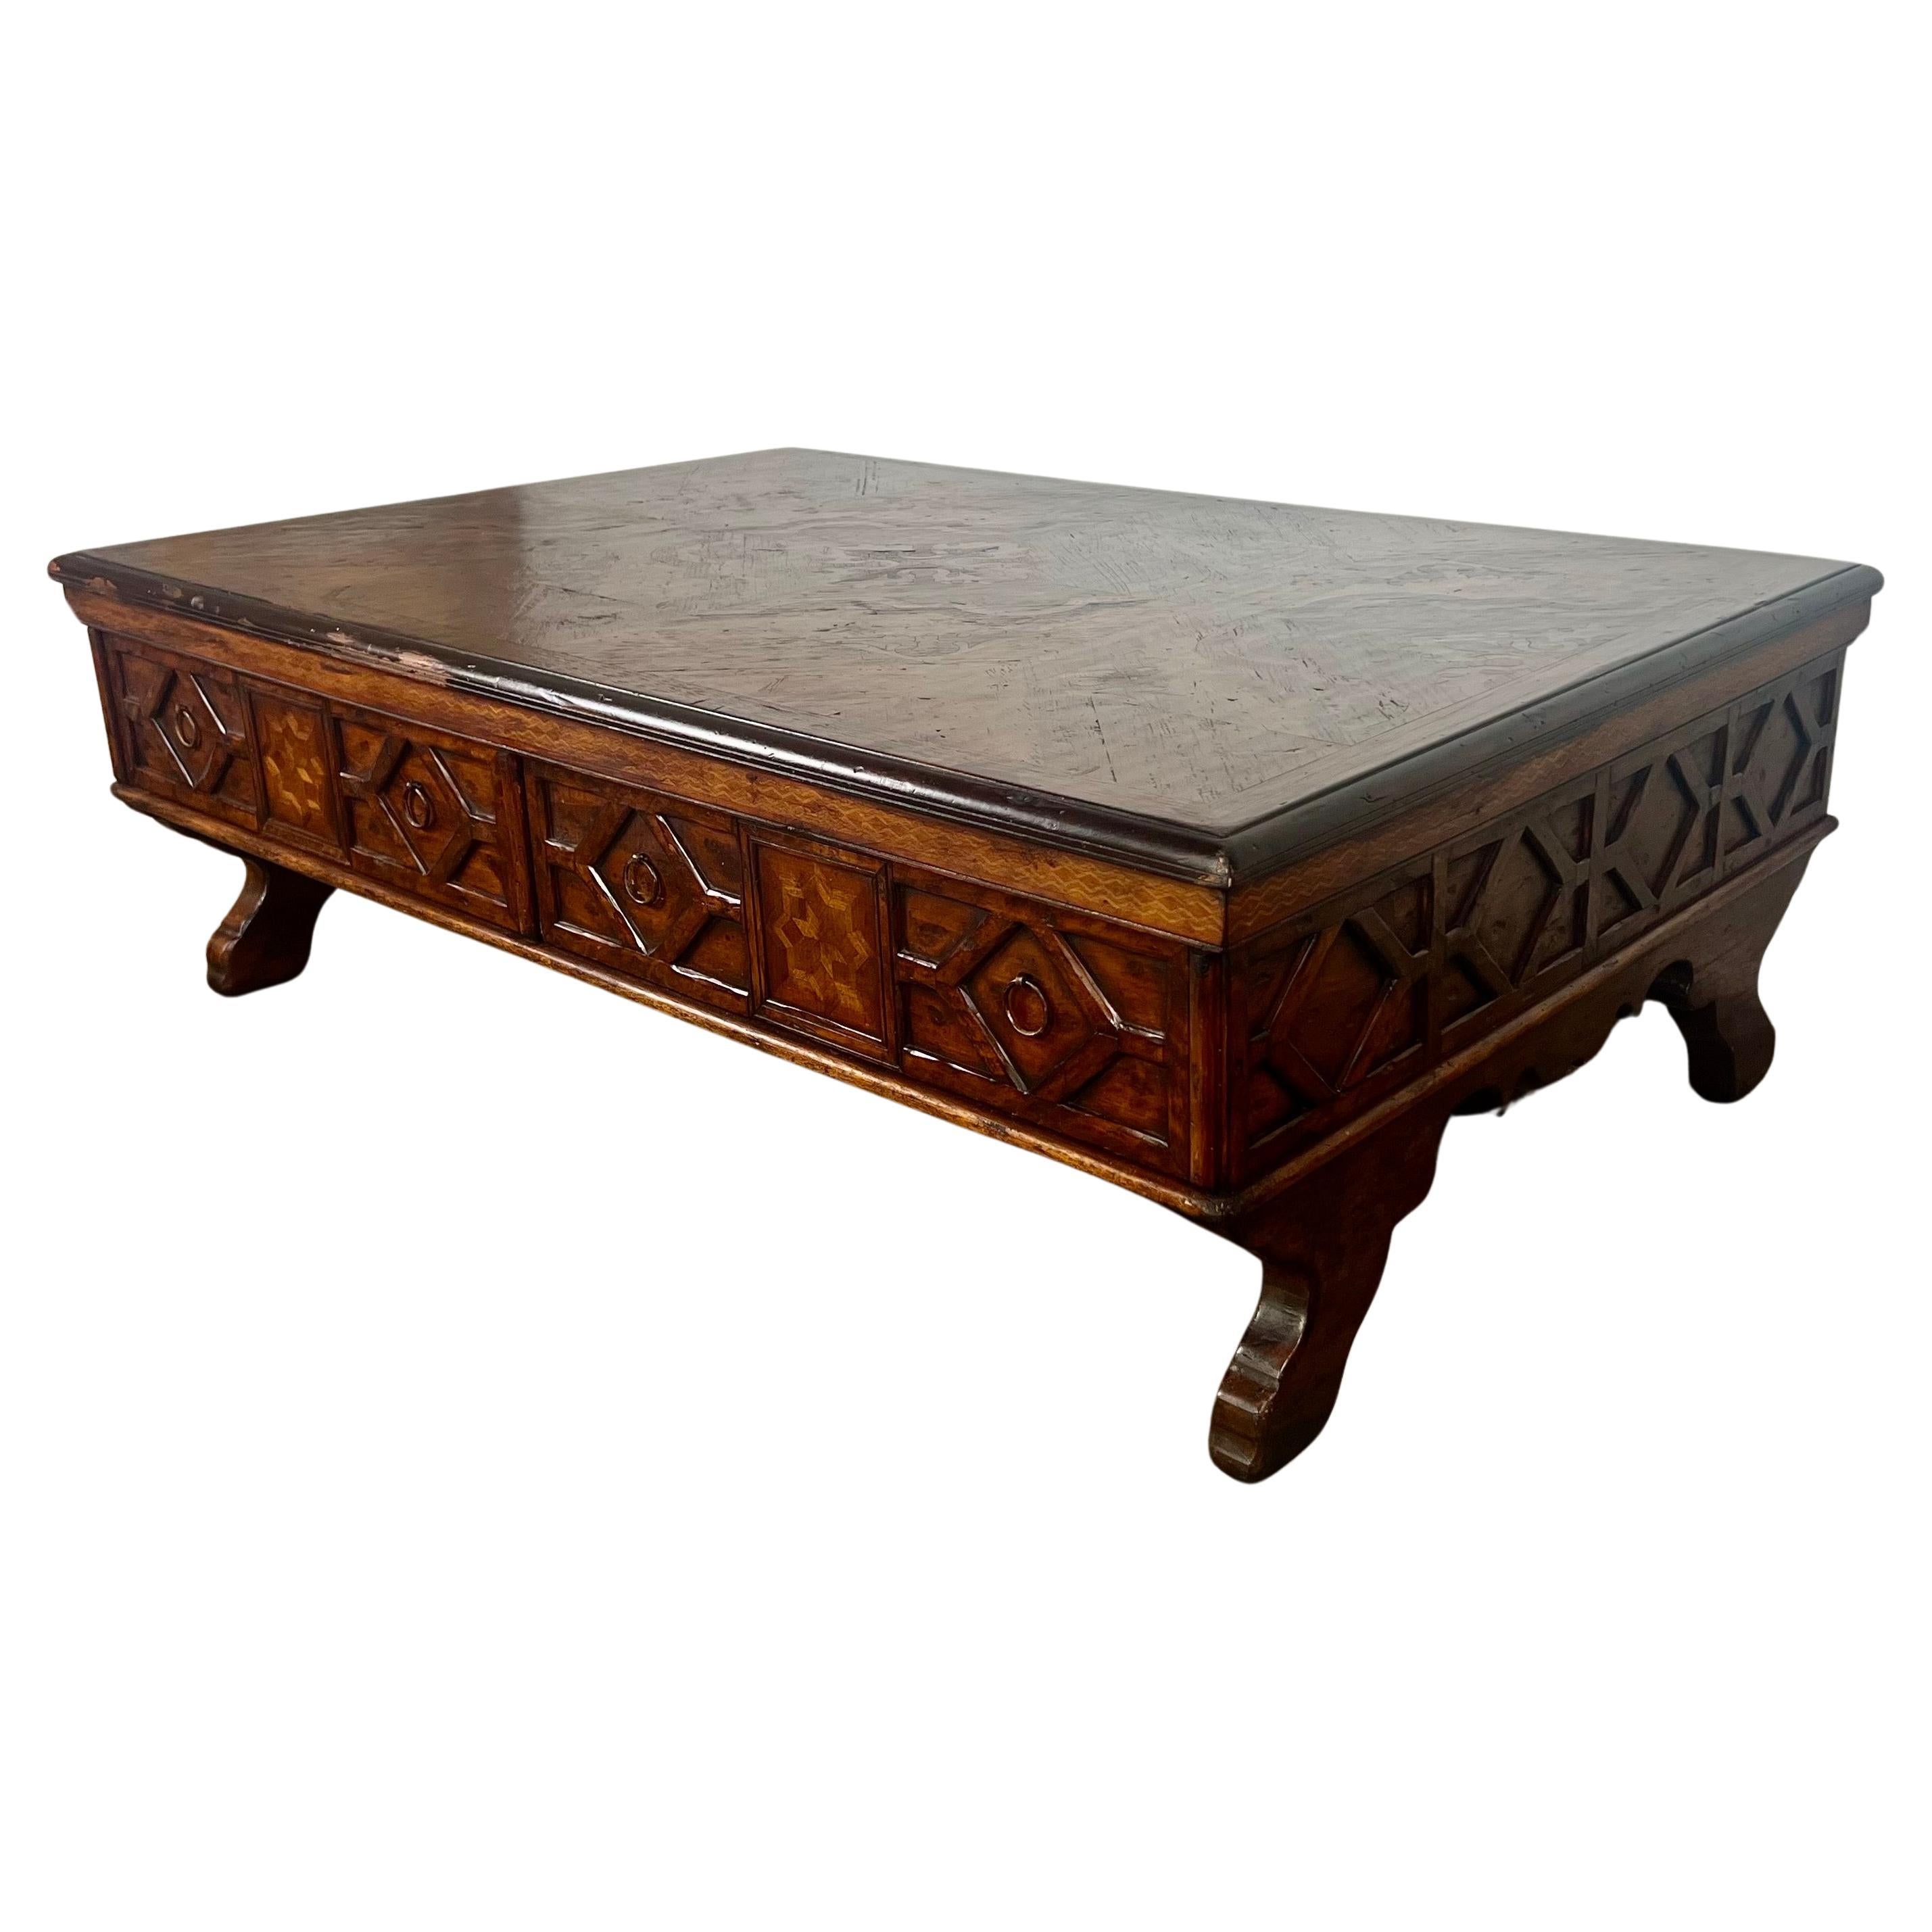 Monumental Spanish Inlaid Coffee Table w/ Drawers For Sale